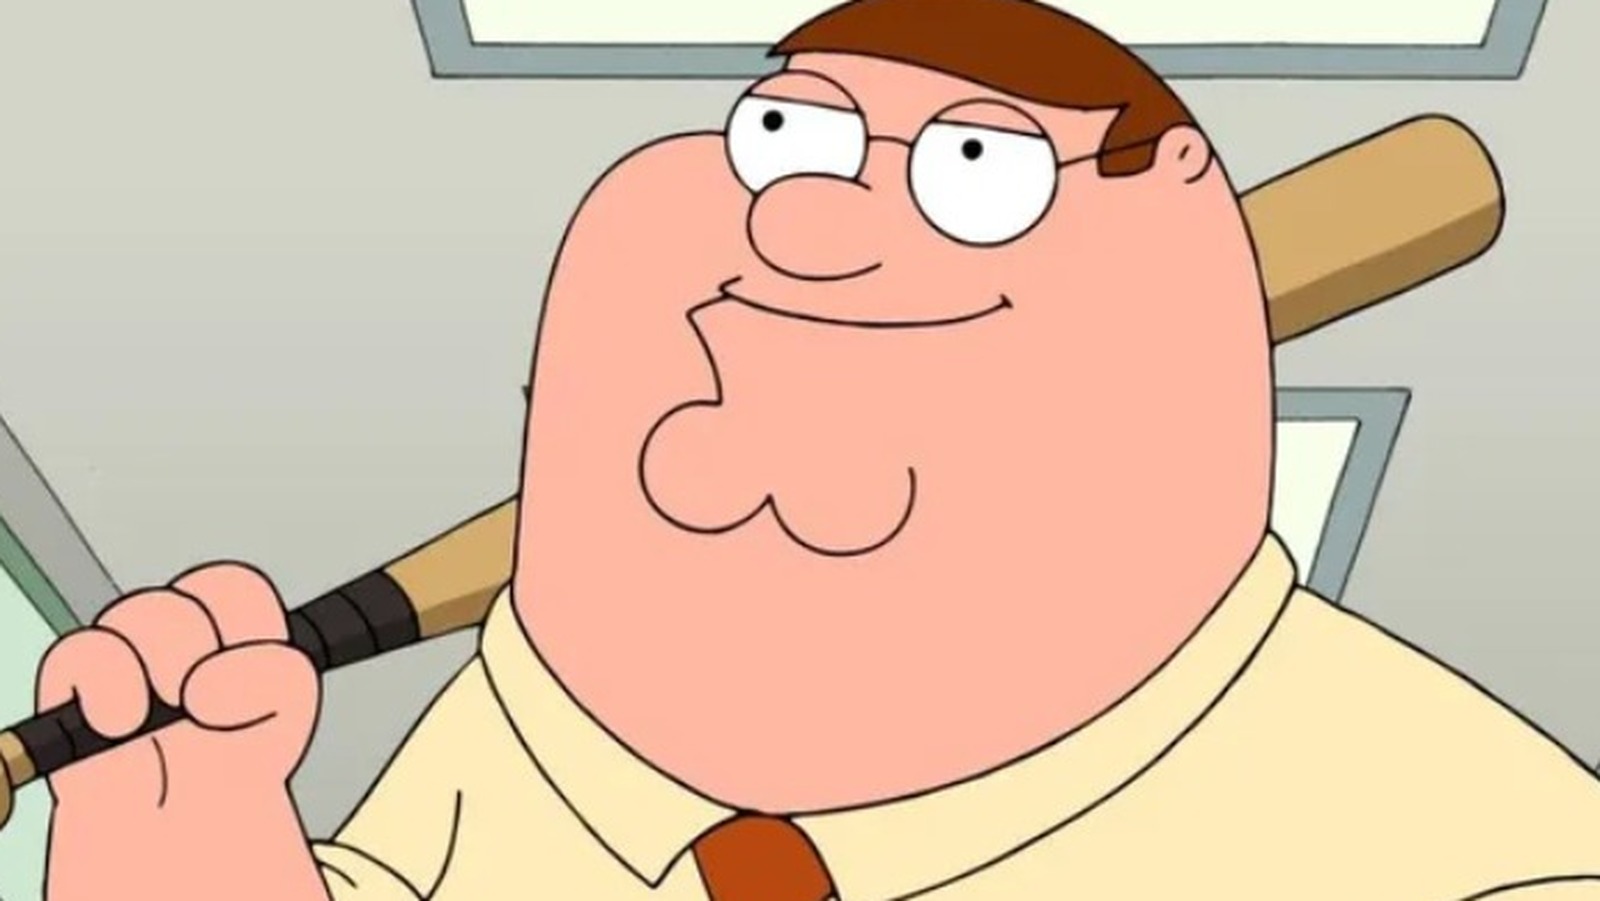 armone norris recommends Pictures Of Peter Griffin From Family Guy